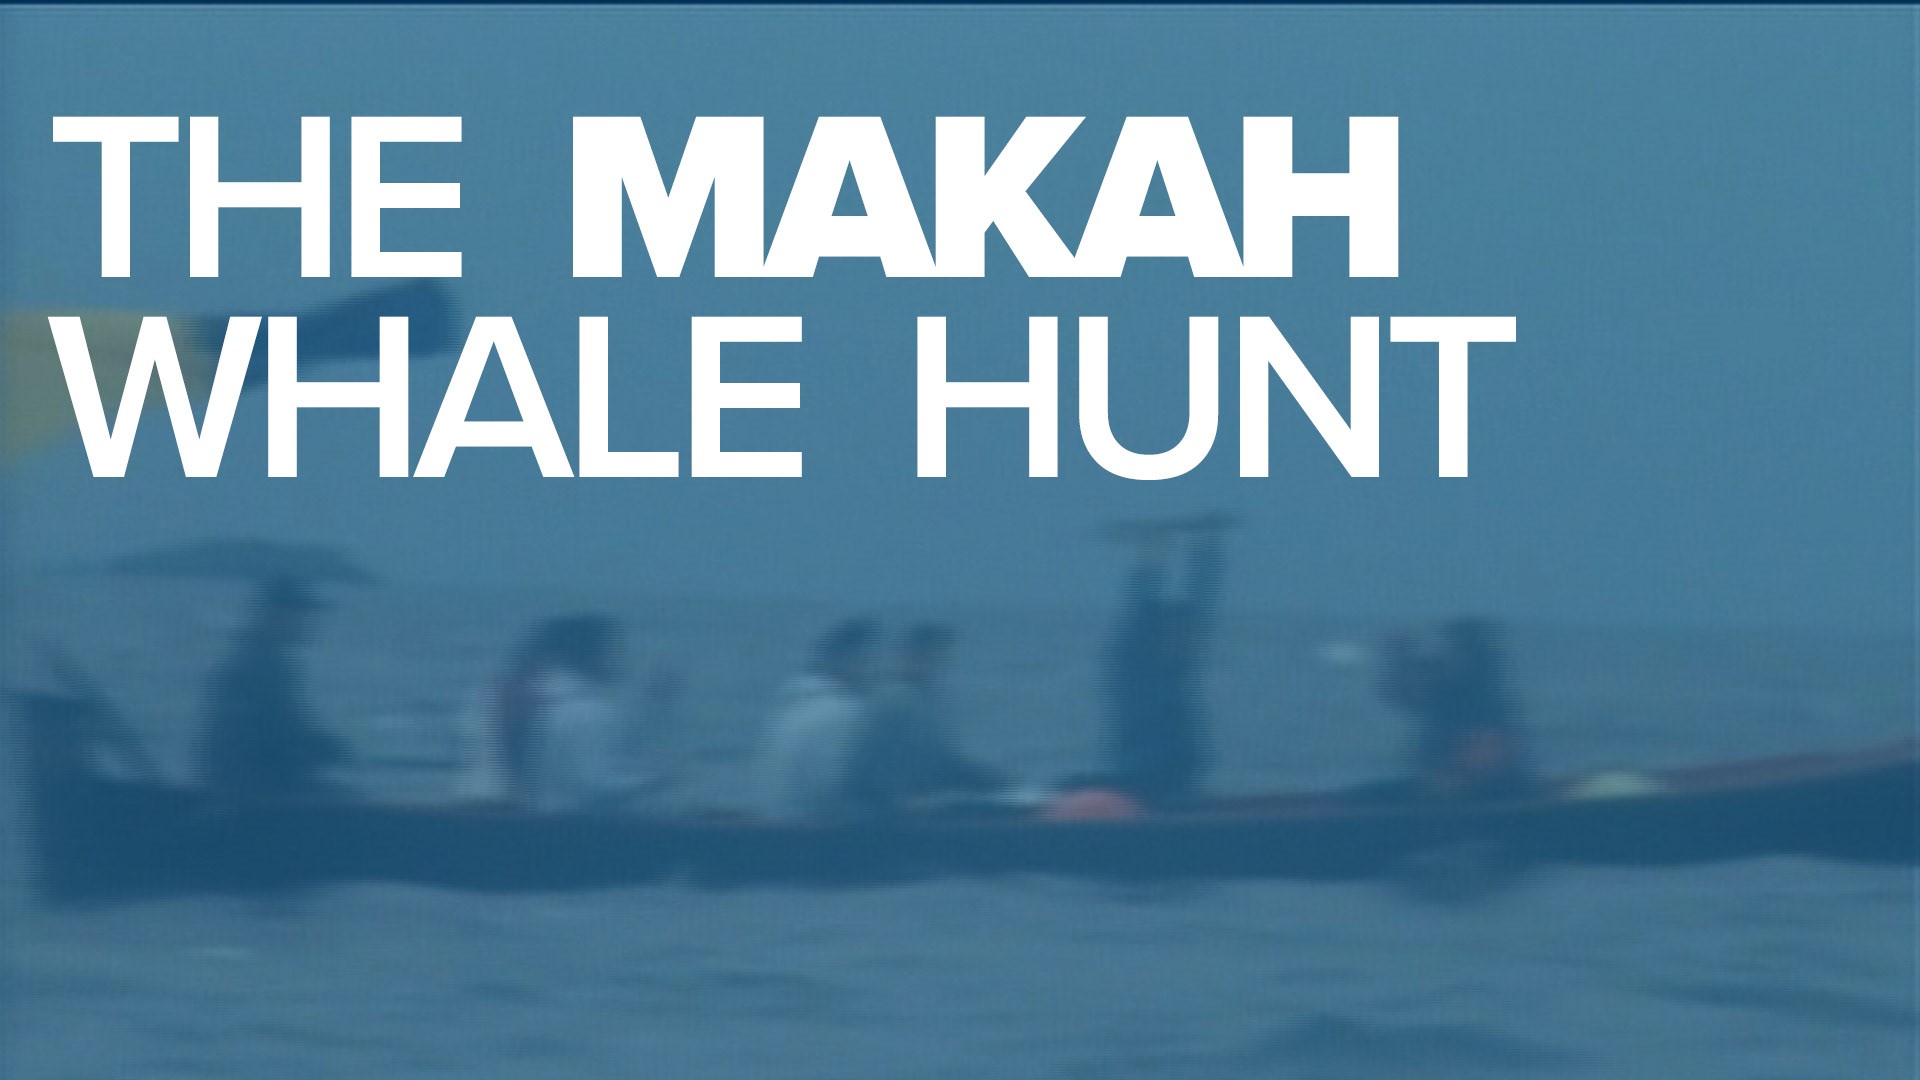 The hunt helped connect the tribe with their whaling past for the first time in 70 years.